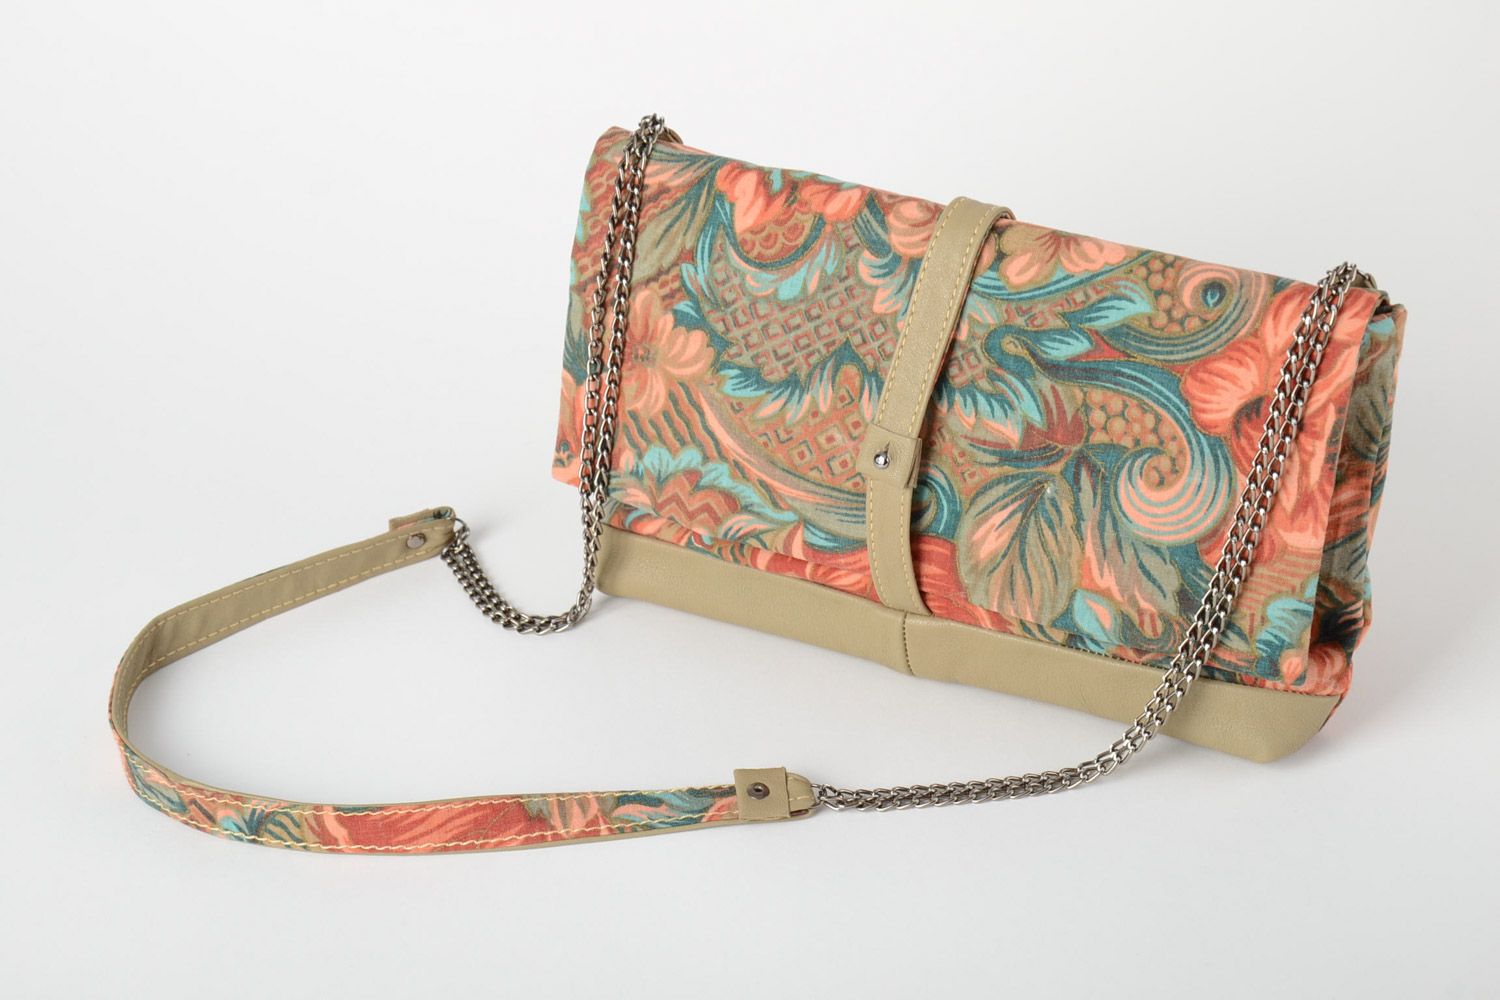 Handmade clutch bag sewn of colorful motley fabric on long chain with magnet lock photo 5